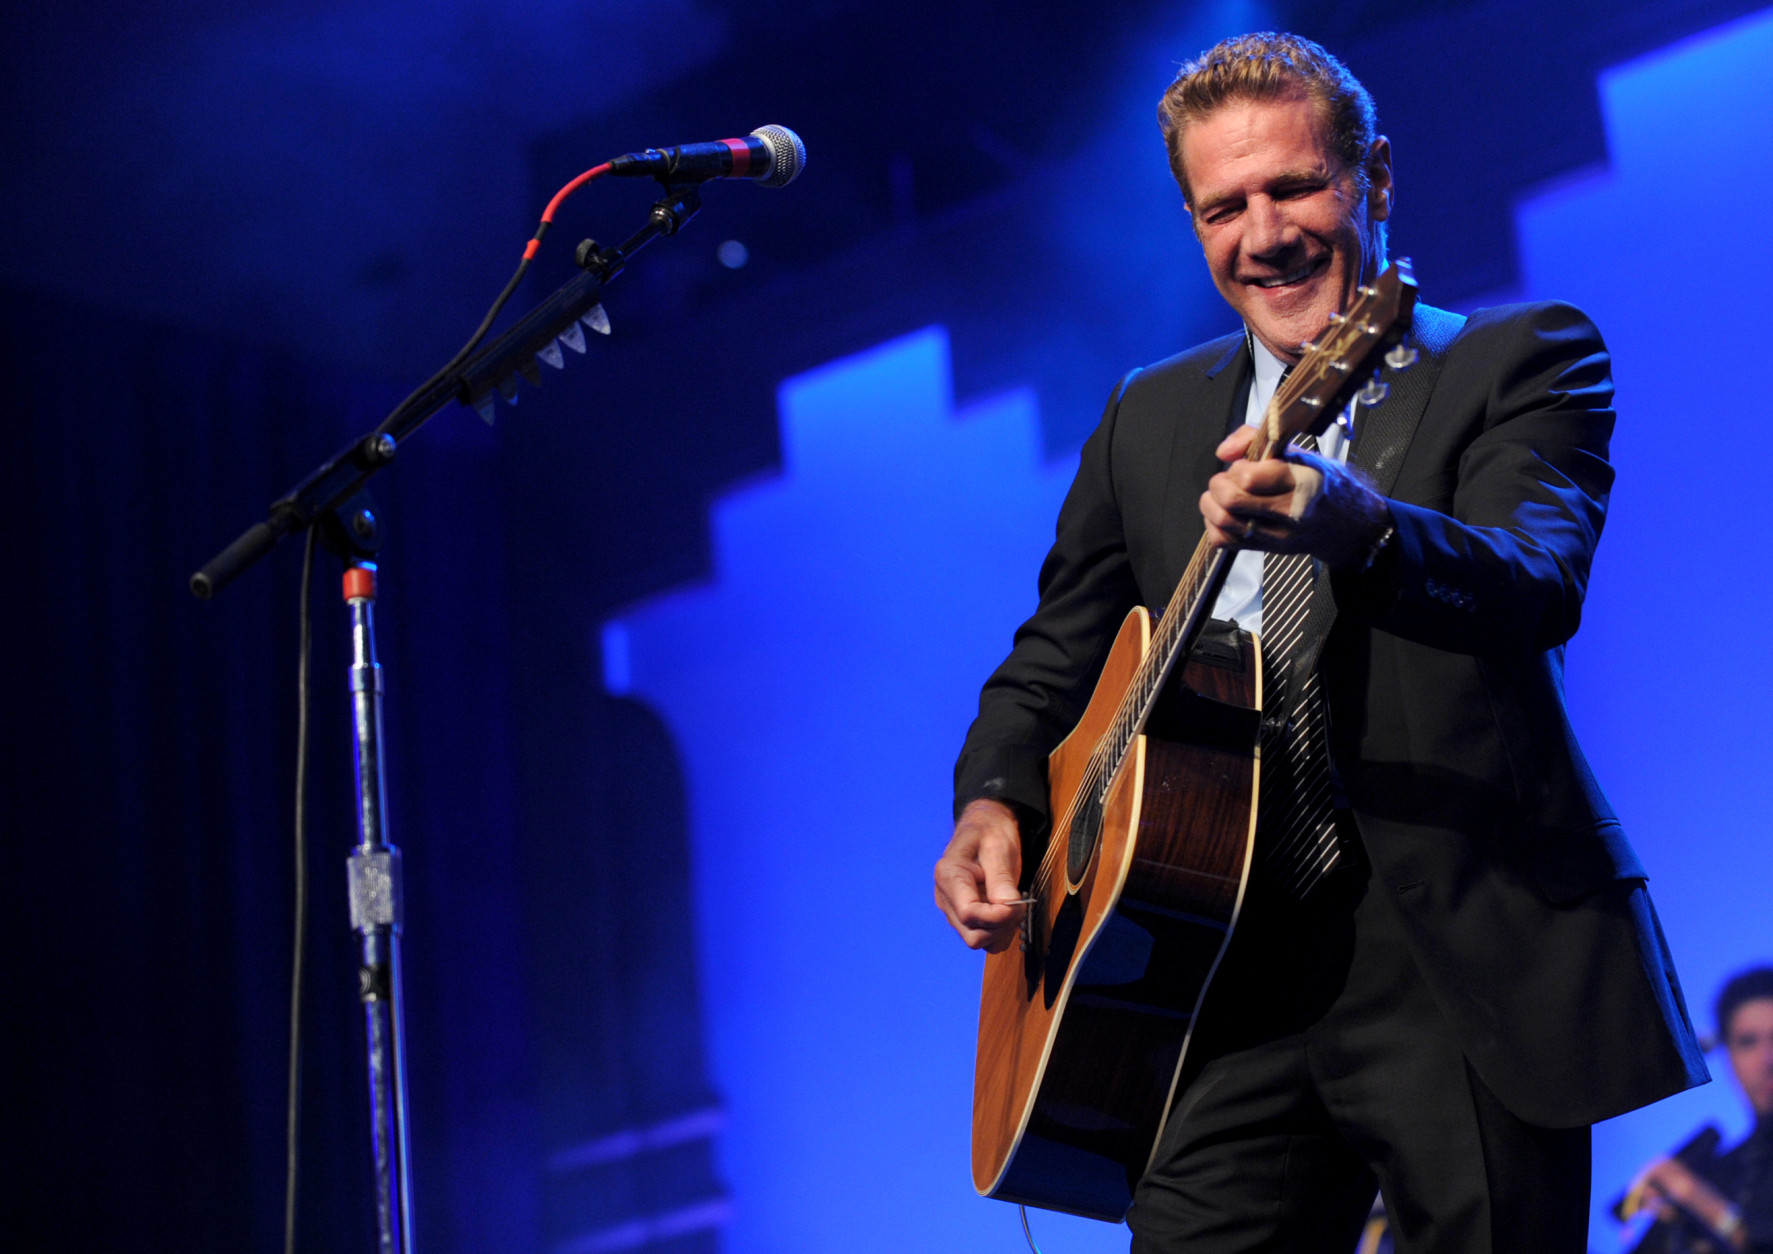 Glenn Frey performs at the 12th Annual Starkey Hearing Foundation "So The World May Hear" Gala on Saturday, August 4, 2012 in St. Paul, Minnesota. (Photo by Diane Bondareff/Invision for Starkey Hearing Foundation)